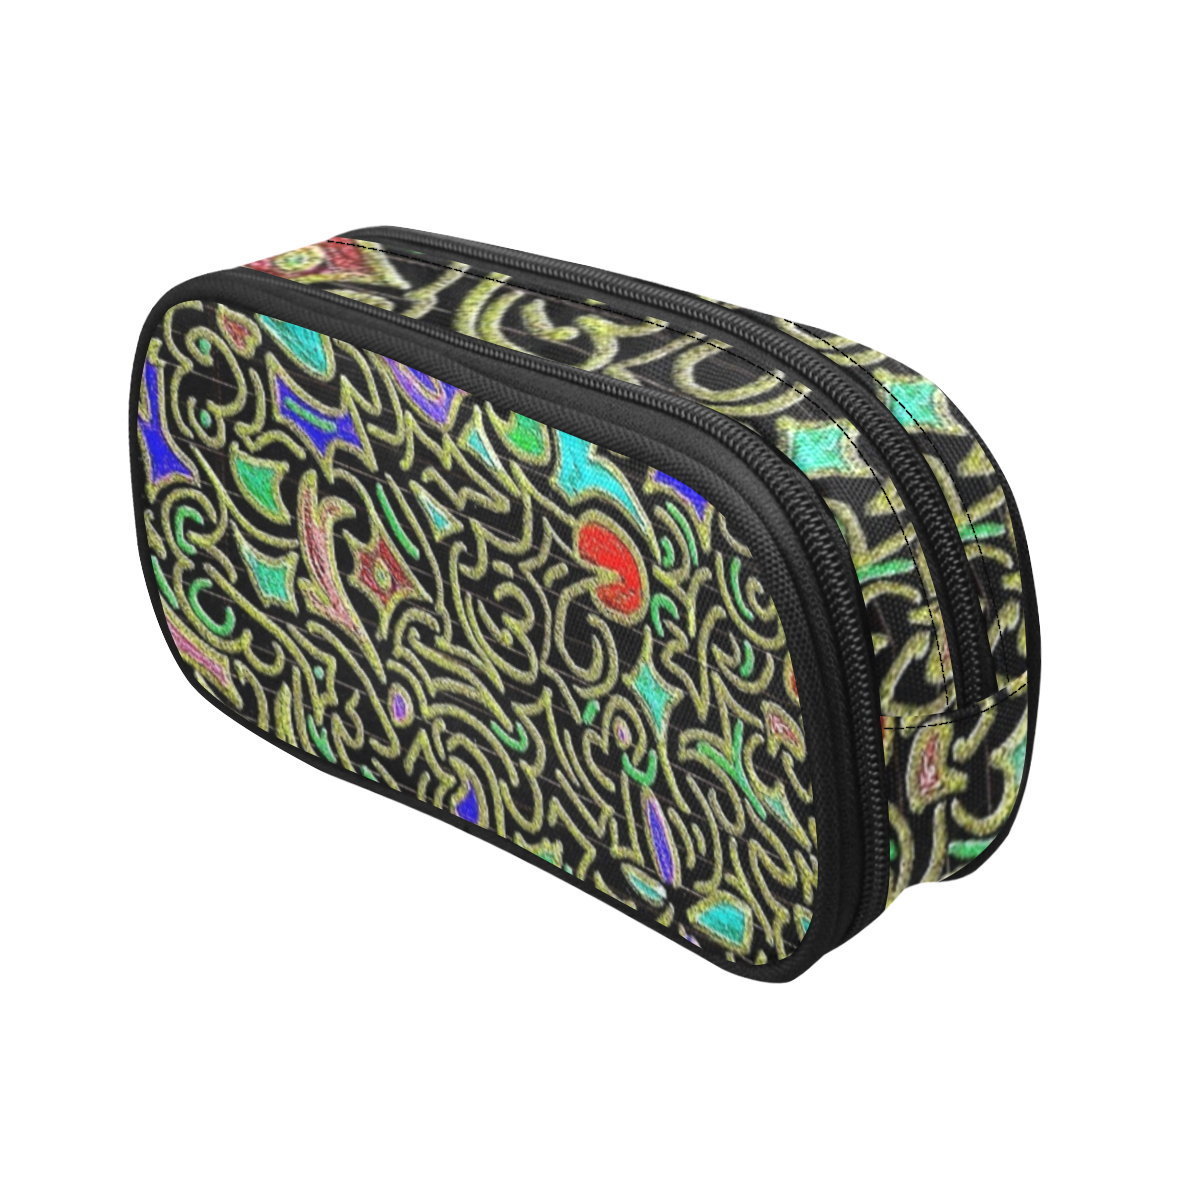 swirl retro abstract doodle Pencil Pouch/Large (Model 1680)